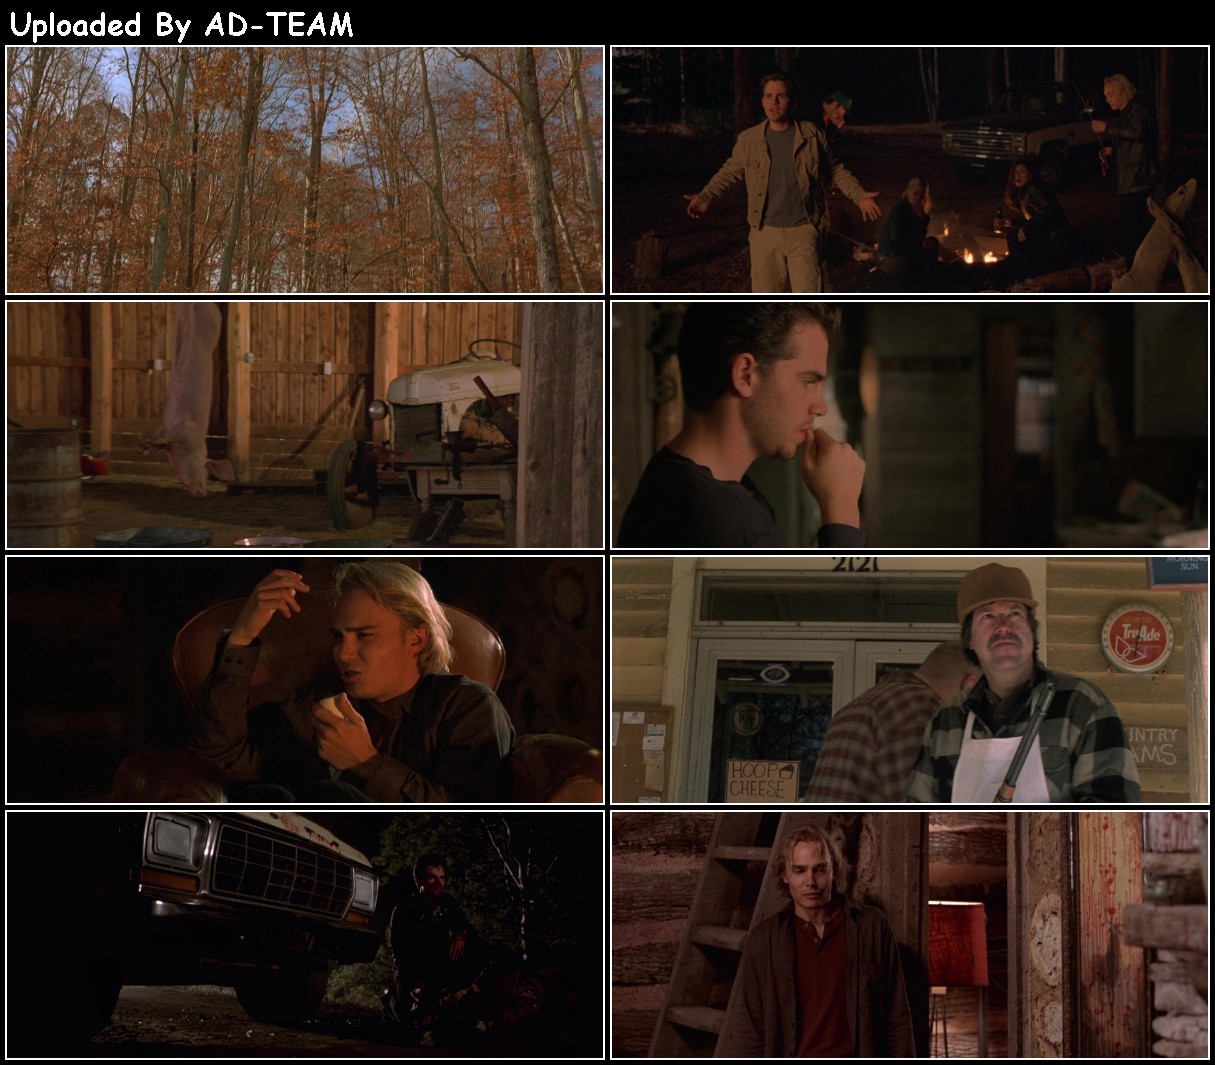 Cabin Fever 2002 UNRATED DC 1080p BluRay H264 AAC-RARBG W6MqVKsT_o